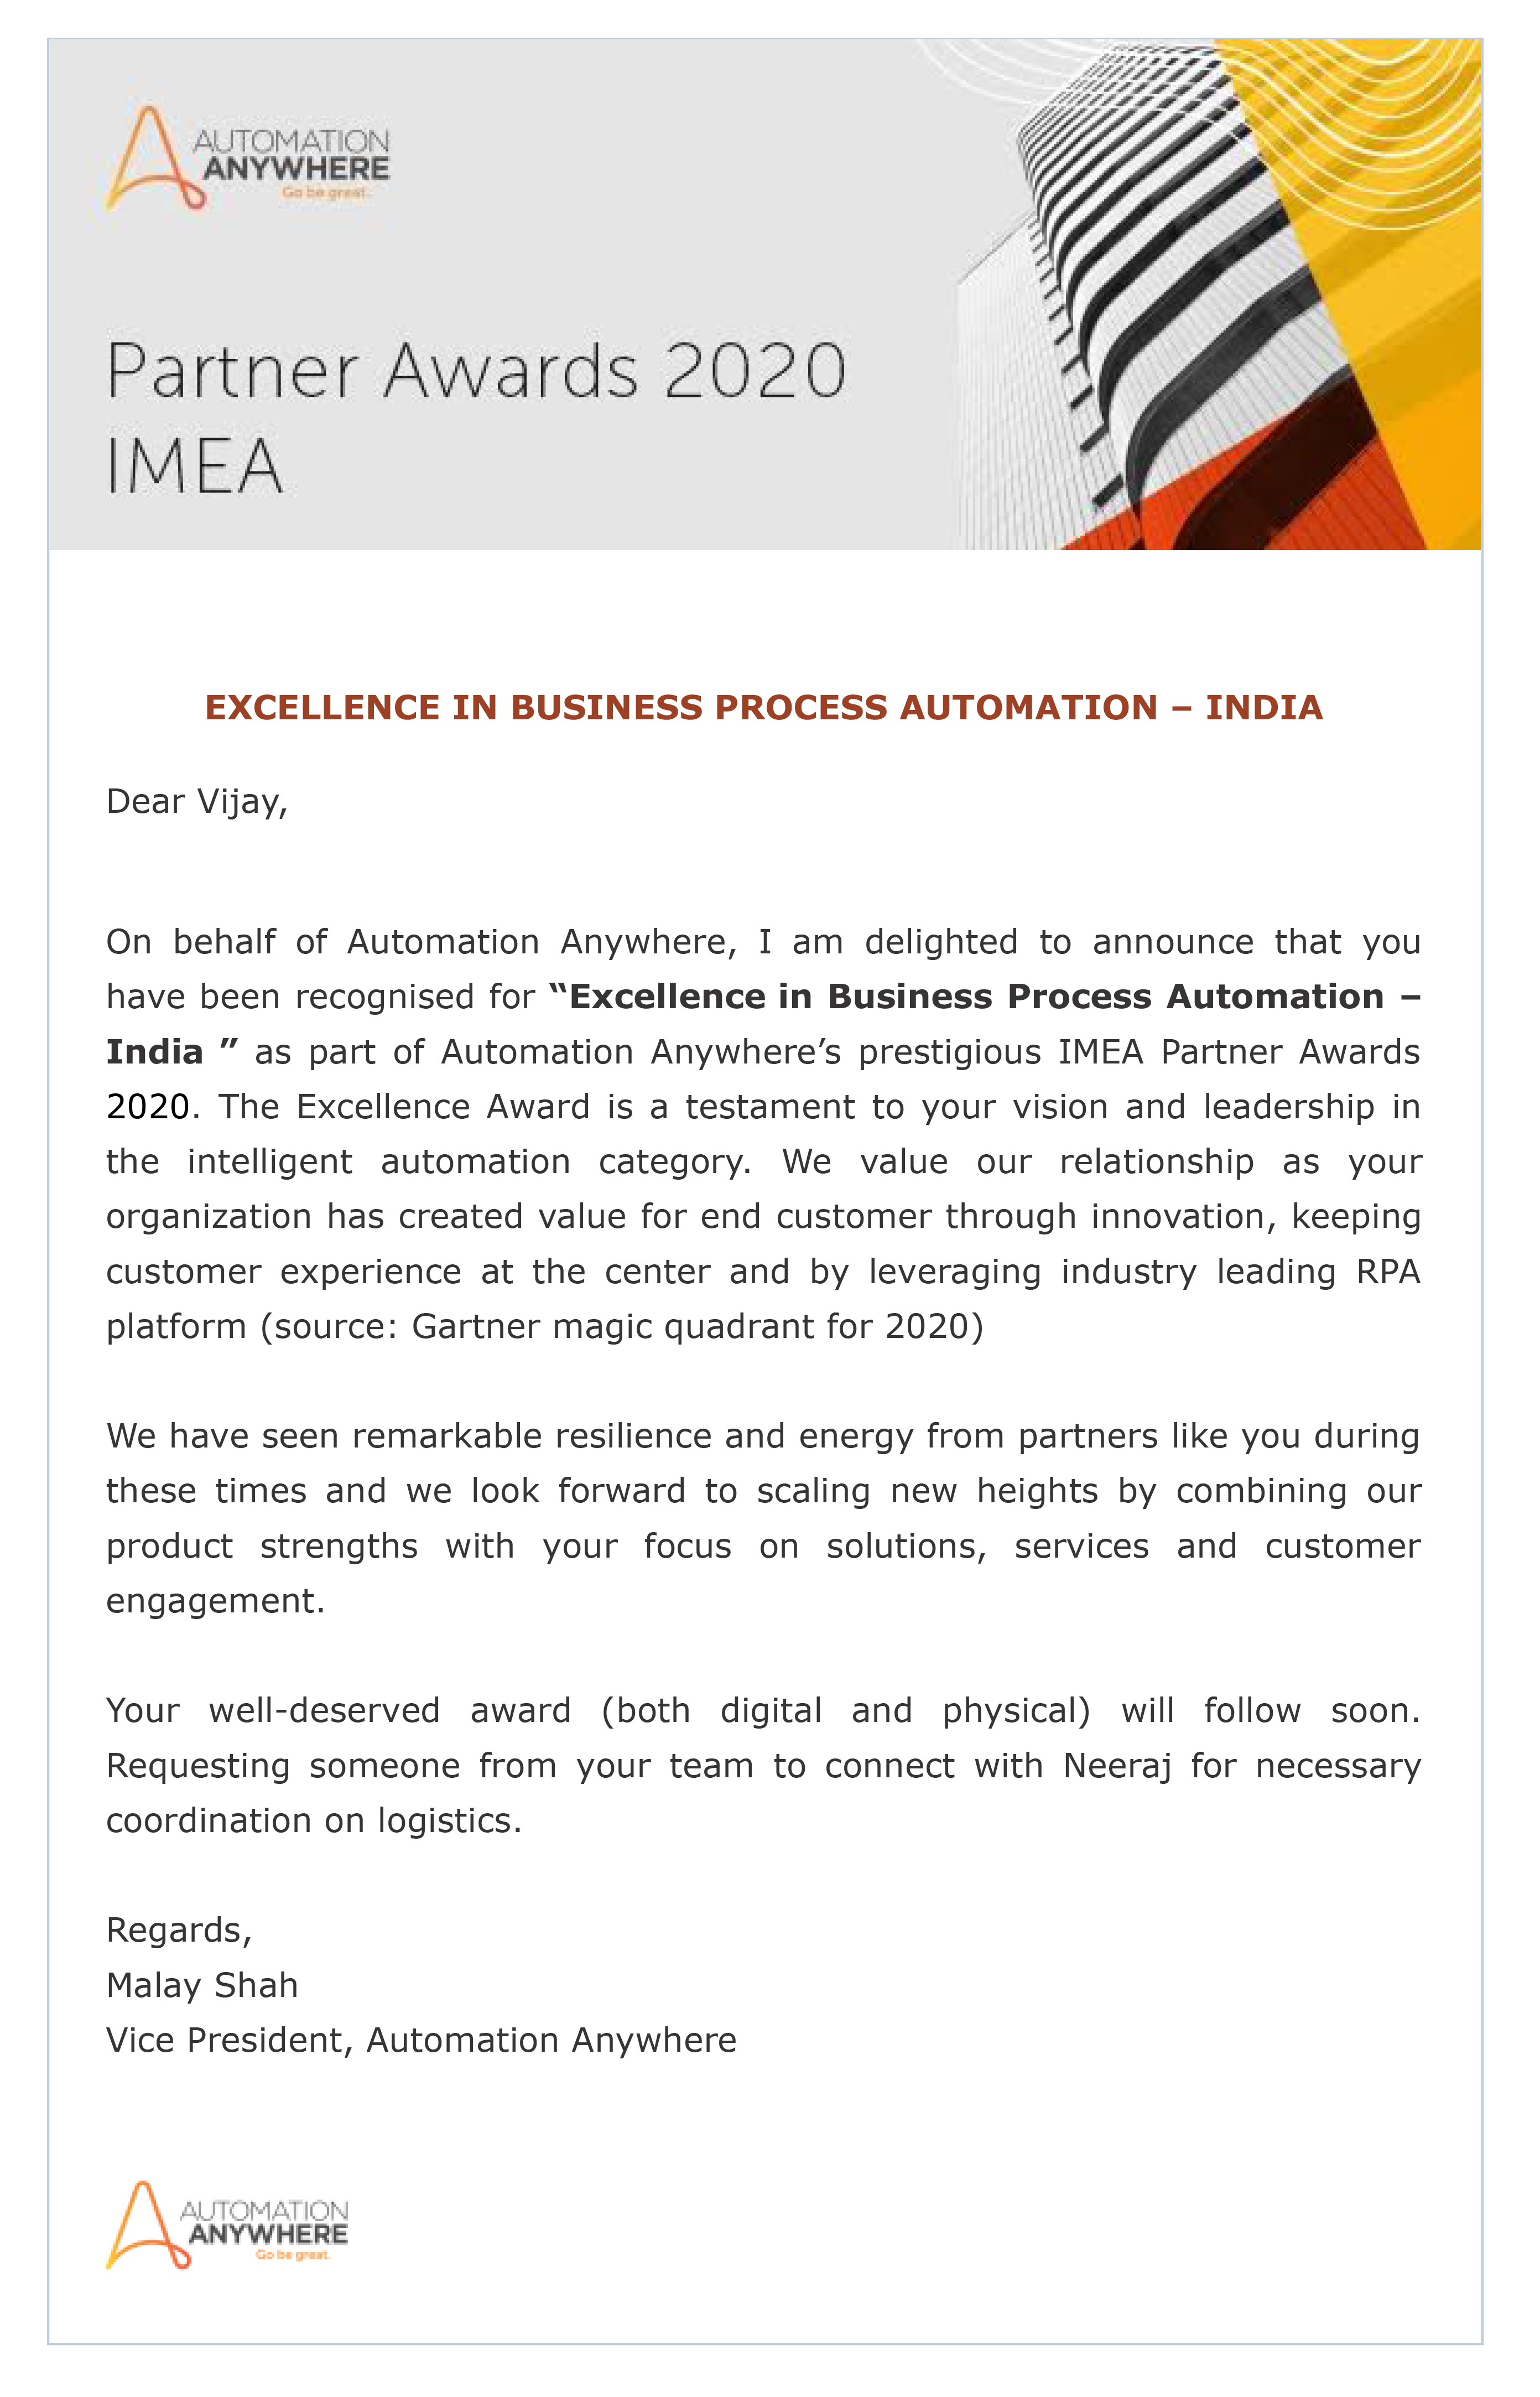 Tangentia | Tangentia is recognized with the highly regarded“Excellence in Business Process Automation – India” award as part of Automation Anywhere’s esteemed IMEA Partner Awards 2020.